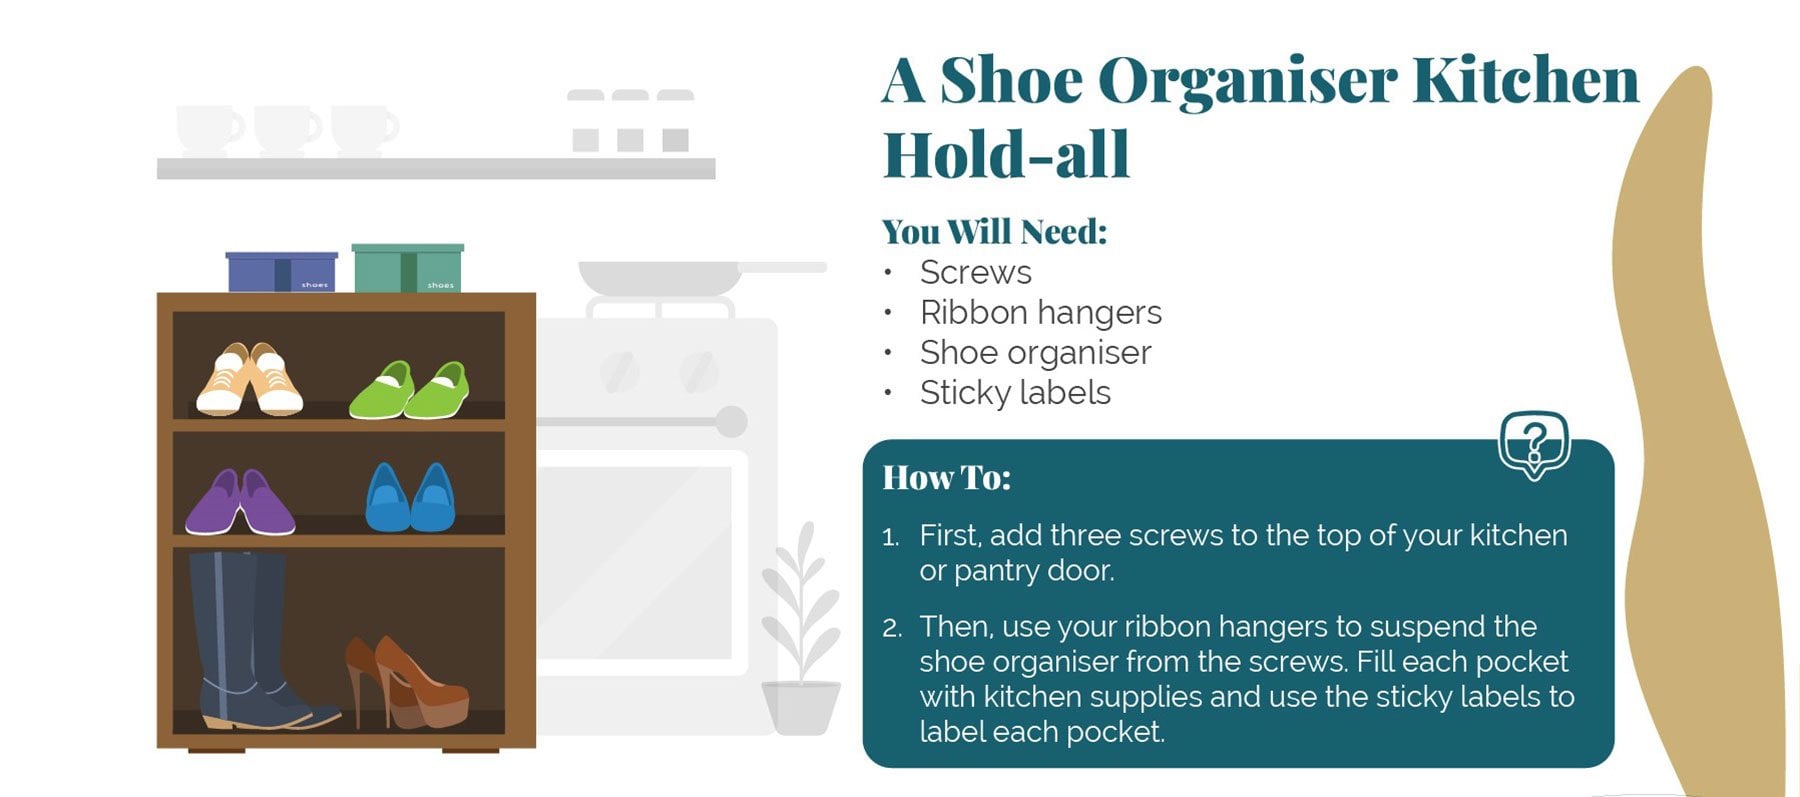 A Shoe Organiser Kitchen Hold-all